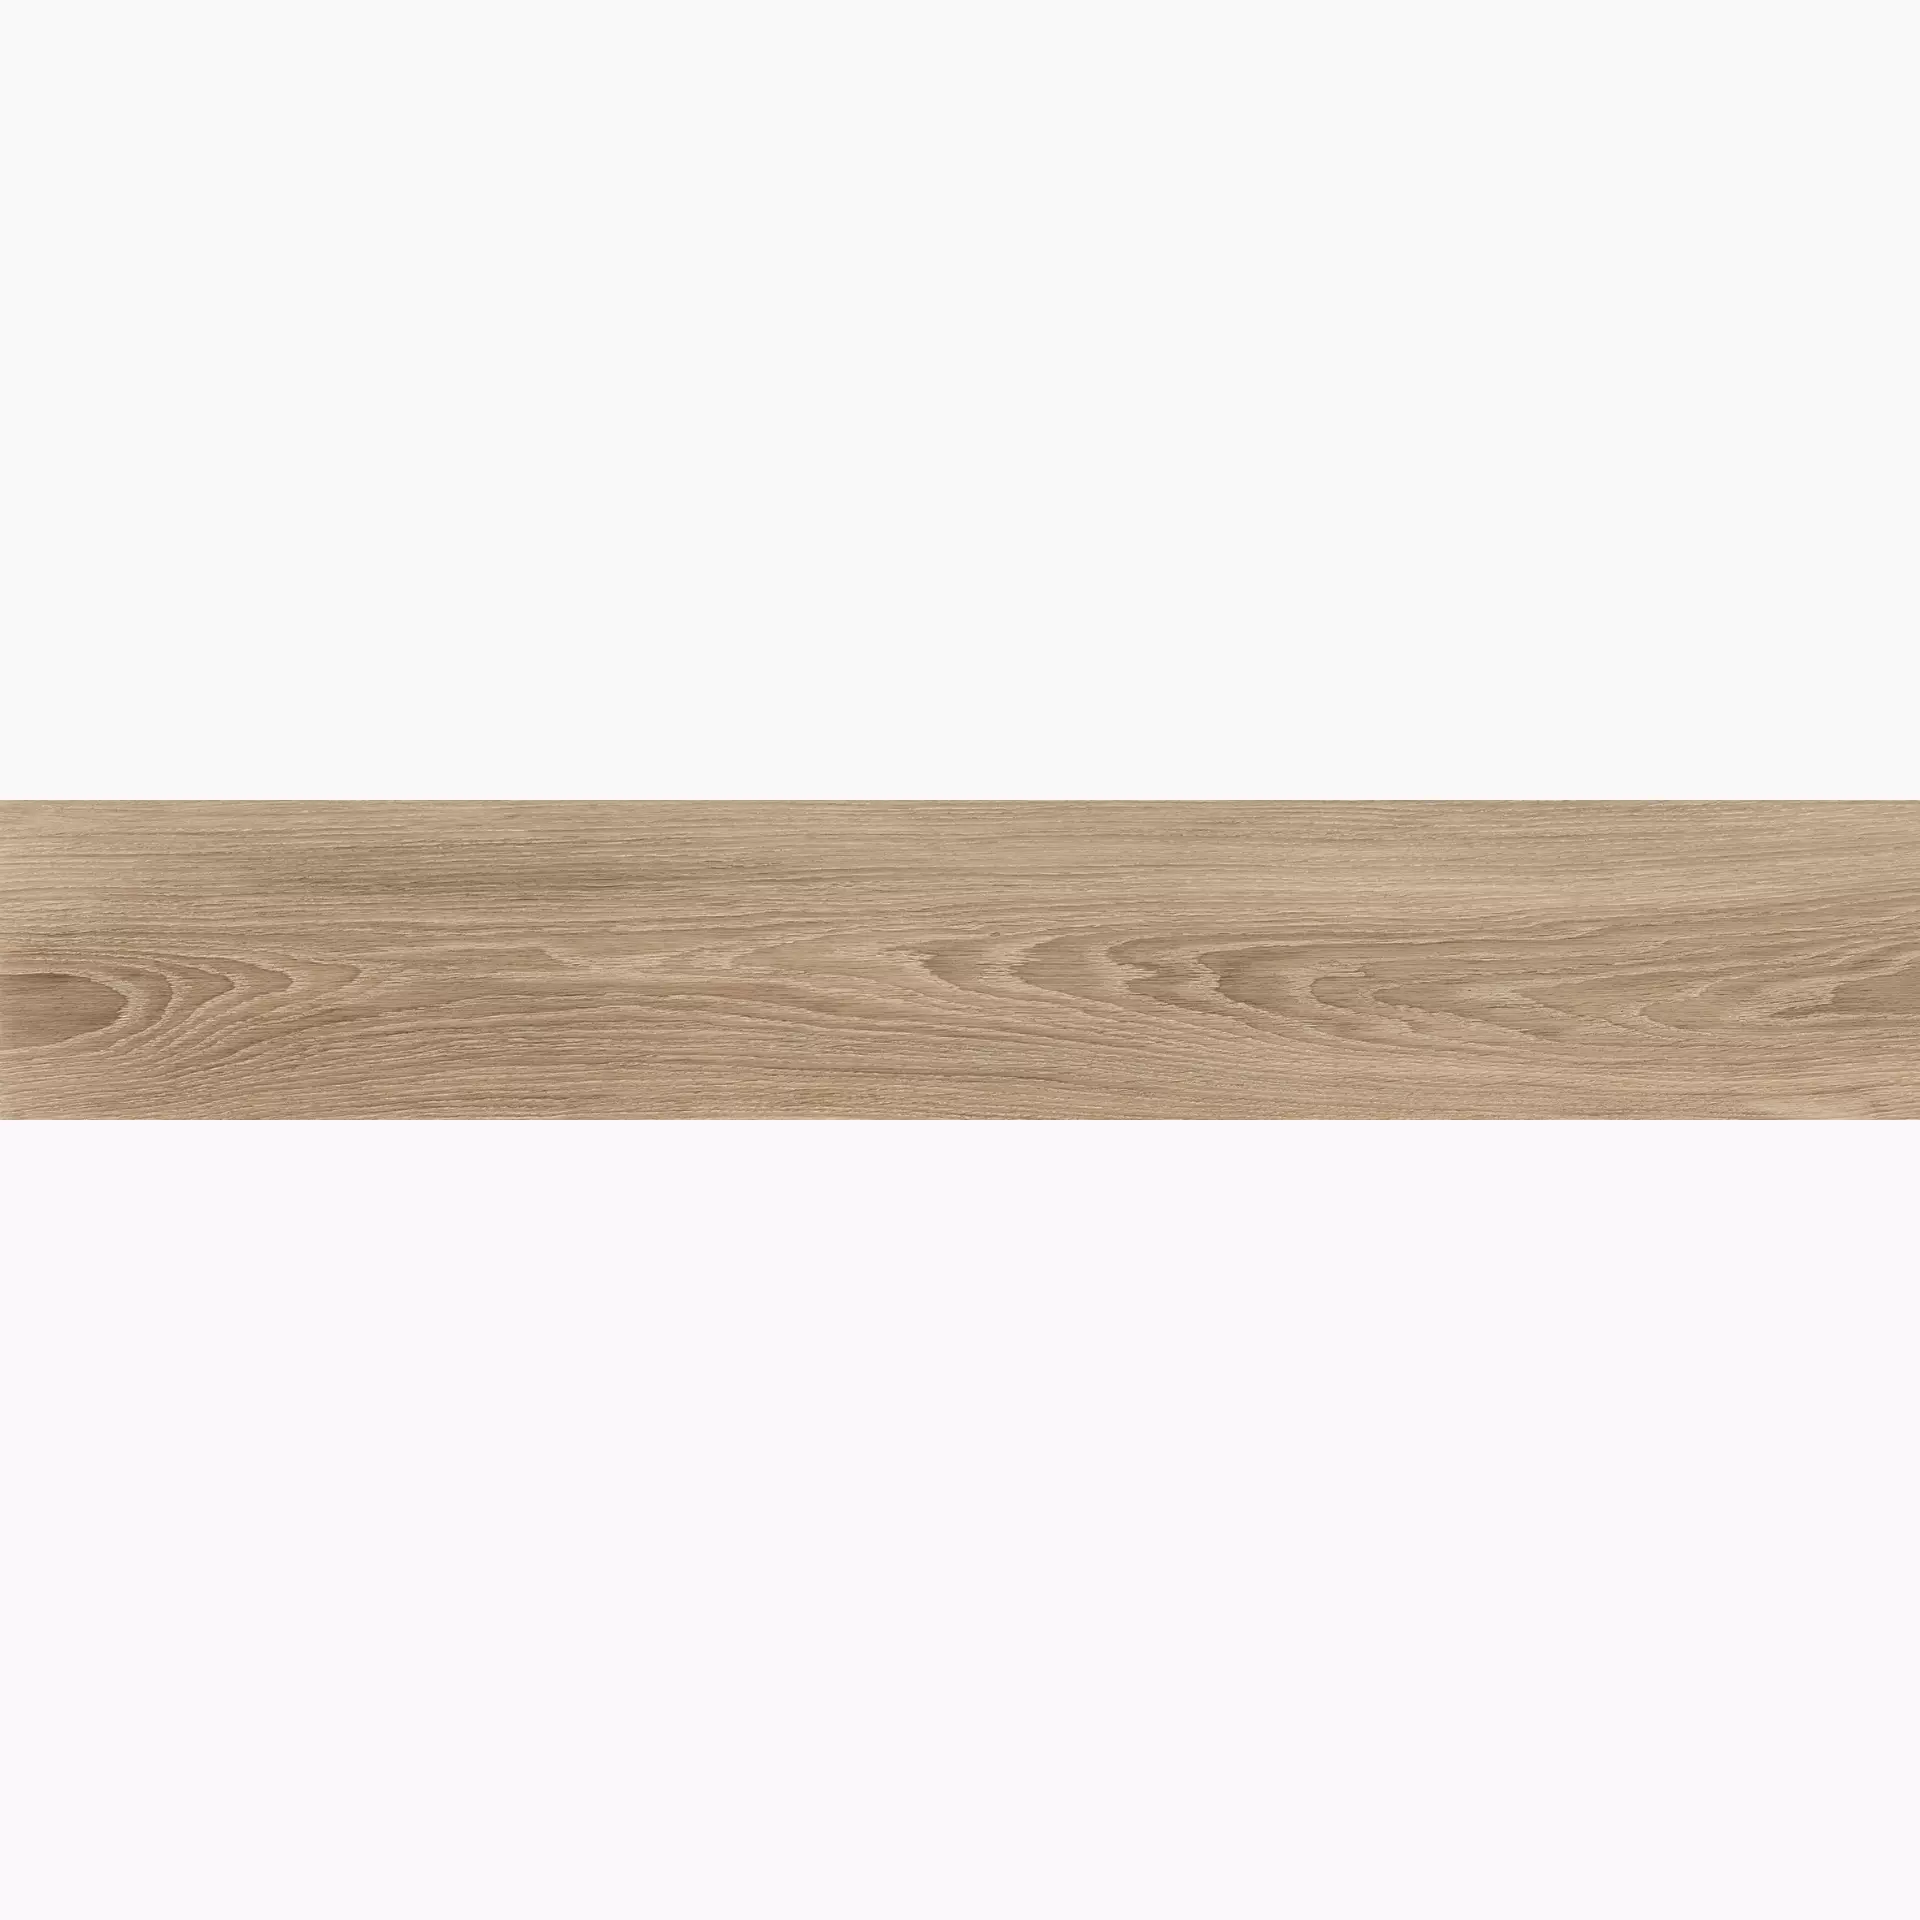 ABK Eco-Chic Naturale Naturale PF60004939 20x120cm rectified 8,5mm